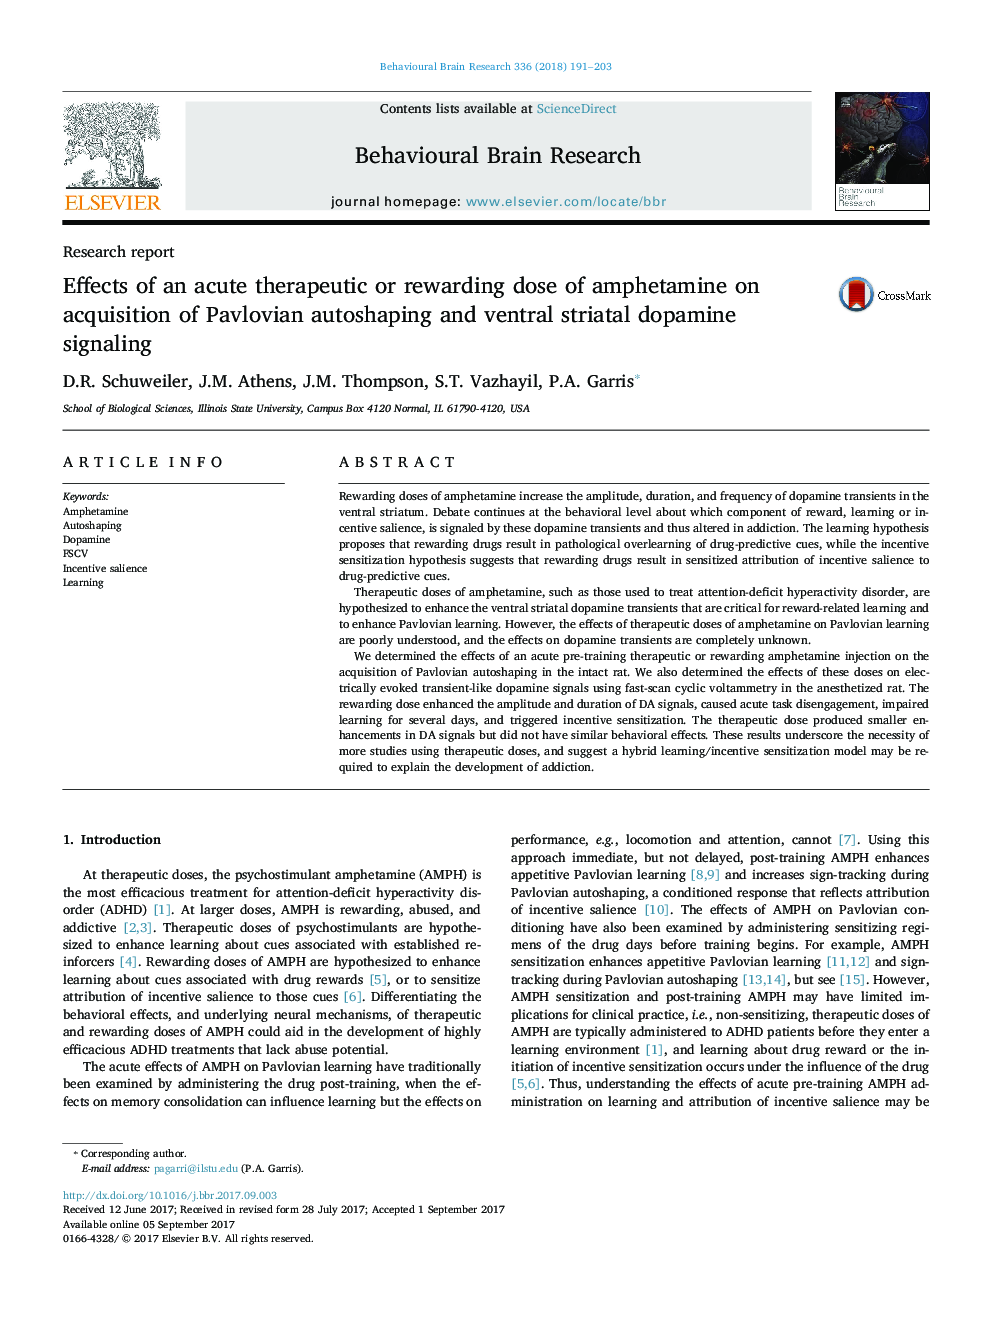 Effects of an acute therapeutic or rewarding dose of amphetamine on acquisition of Pavlovian autoshaping and ventral striatal dopamine signaling